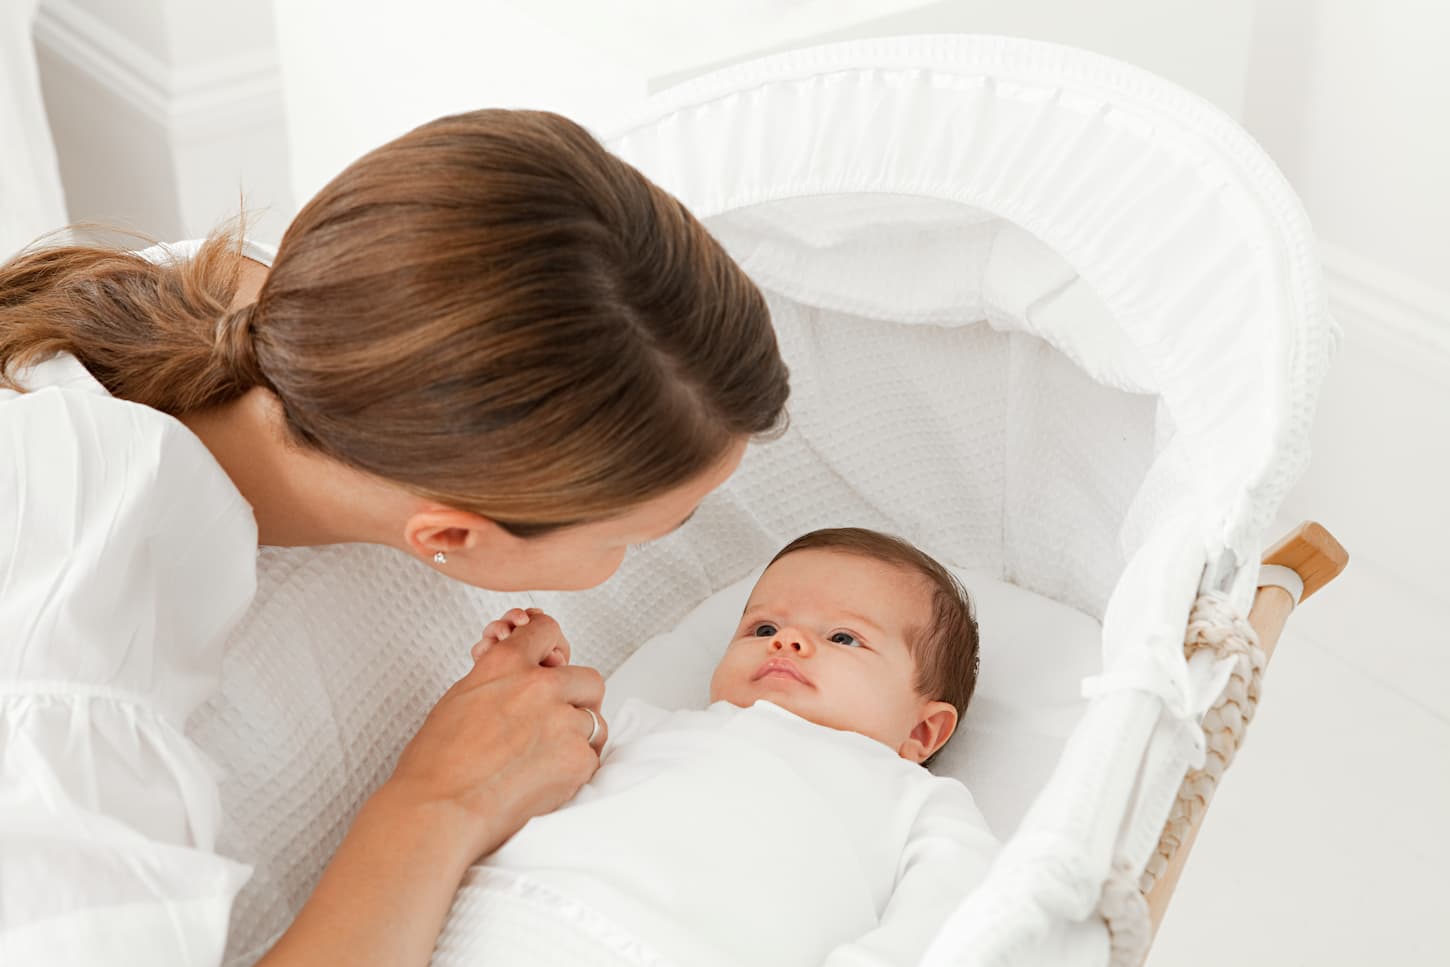 An image of a Mother with her baby in a bassinet.